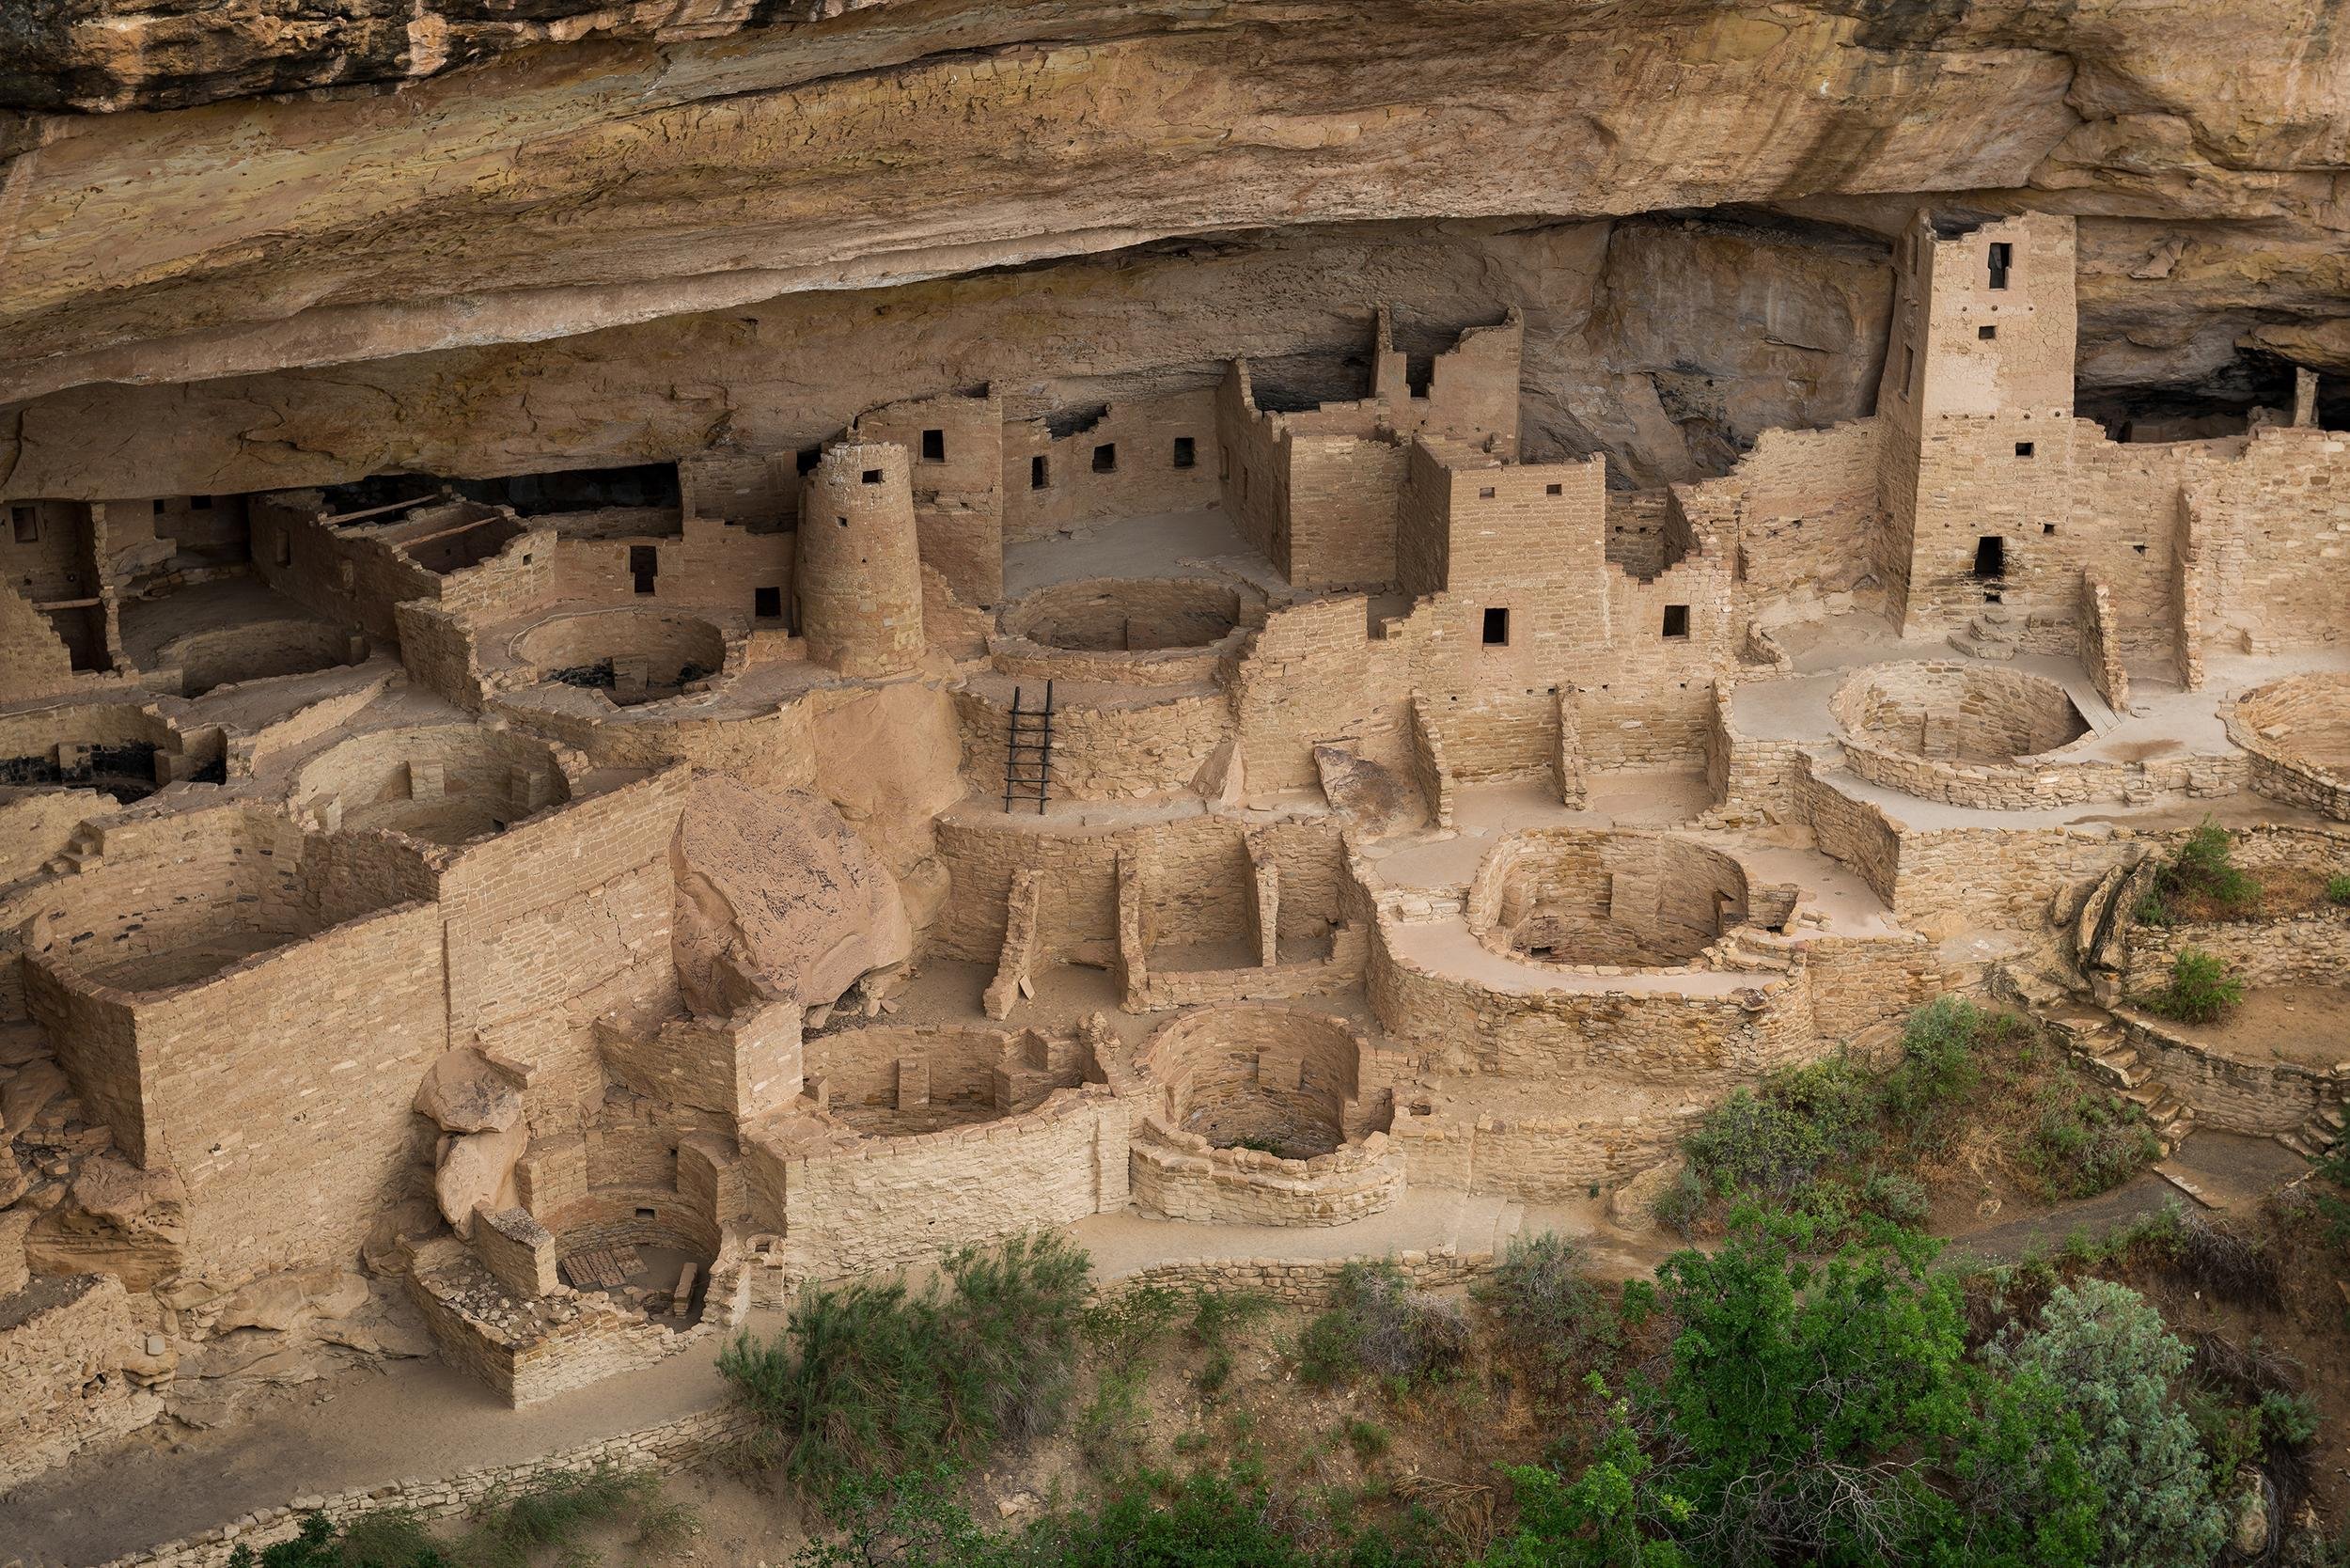 <p><a href="https://www.nps.gov/meve/index.htm">Mesa Verde National Park</a> in Montezuma County is a must-see if you're in southwest Colorado. Entrance to the park costs $30 a vehicle from May through September ($20 otherwise) and is valid for seven days; guided tours for the Cliff Palace, Balcony House, and Long House cost $8 a person. This extra fee gives you access to the largest archeological preserve in the country, with structures that are at least 700 years old. </p><p><b>Related:</b> <a href="https://blog.cheapism.com/ancient-ruins/">Incredible Ancient Ruins Across North America</a></p>